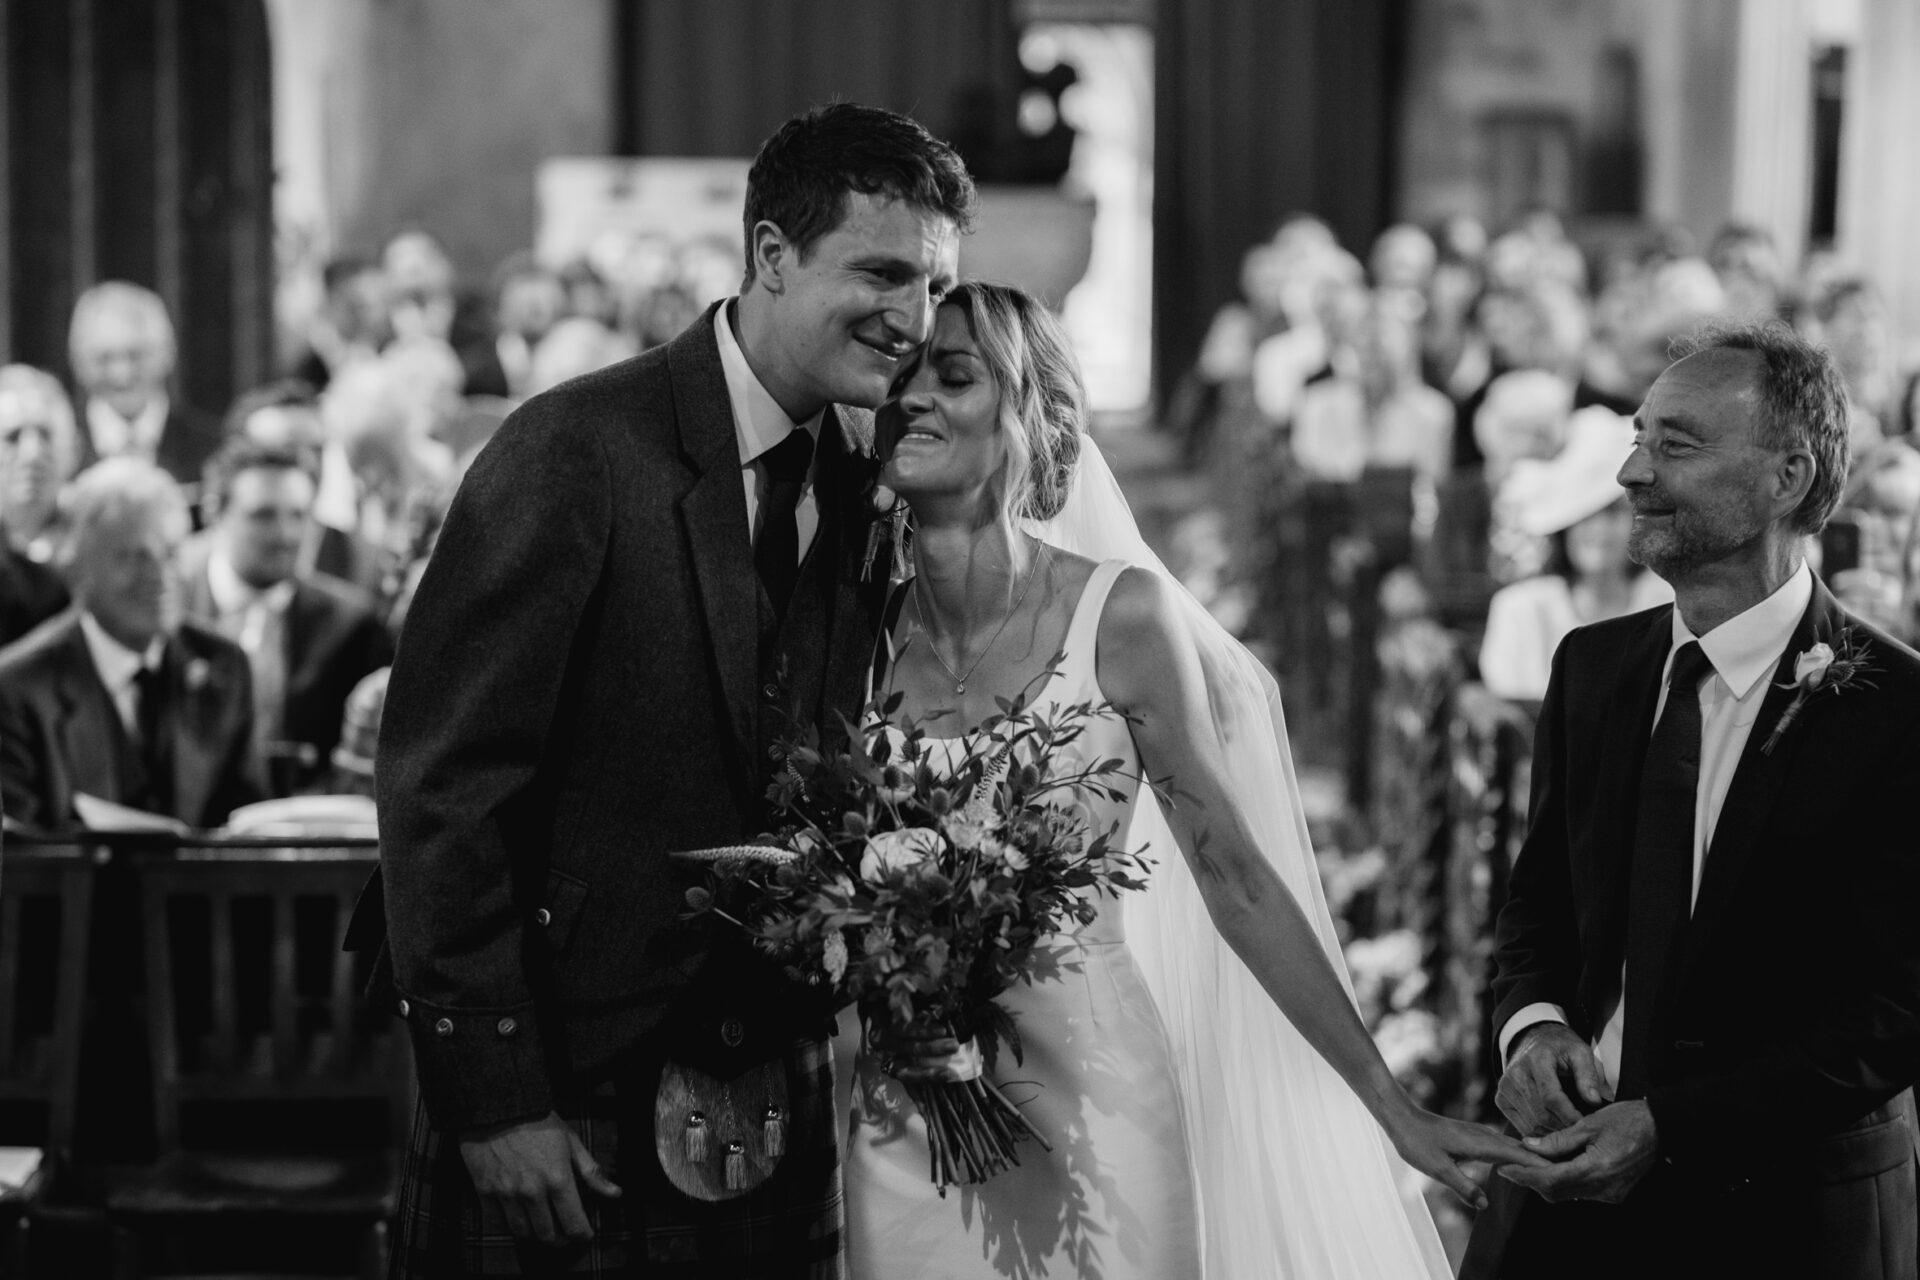 The bride and groom share an emotional embrace at the end of the aisle of this Devon church wedding ceremony